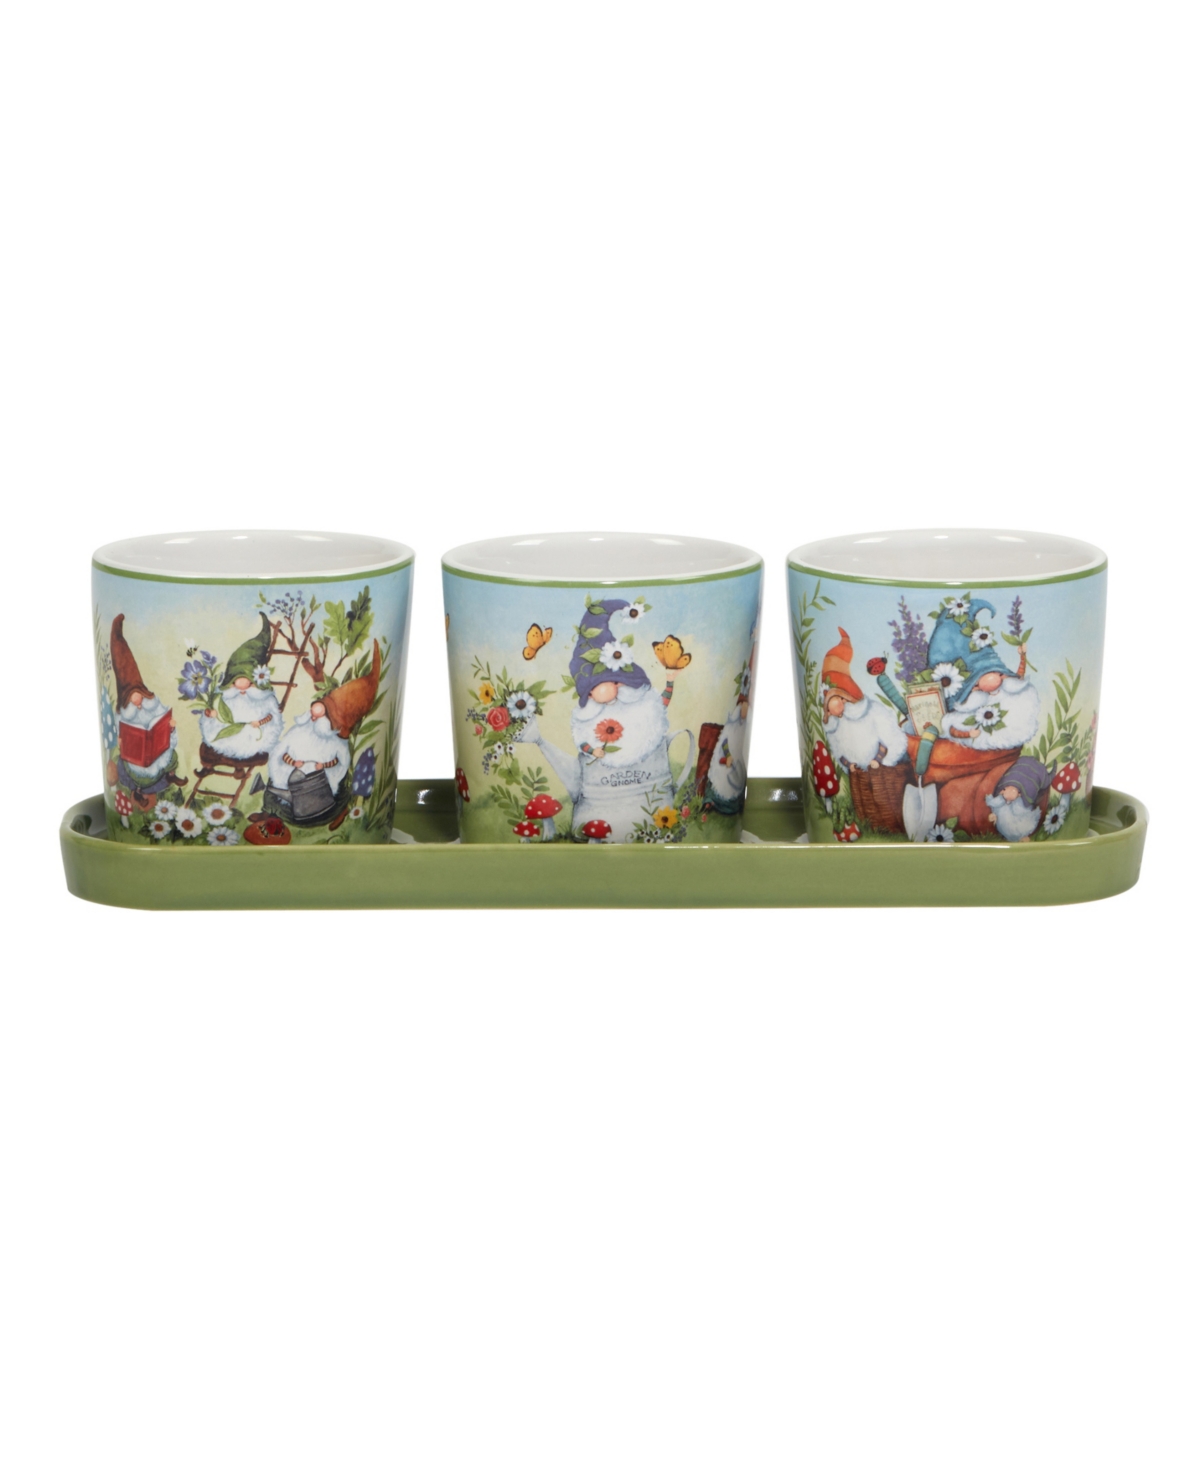 Certified International Garden Gnomes 3 Pc Planter Set With Tray